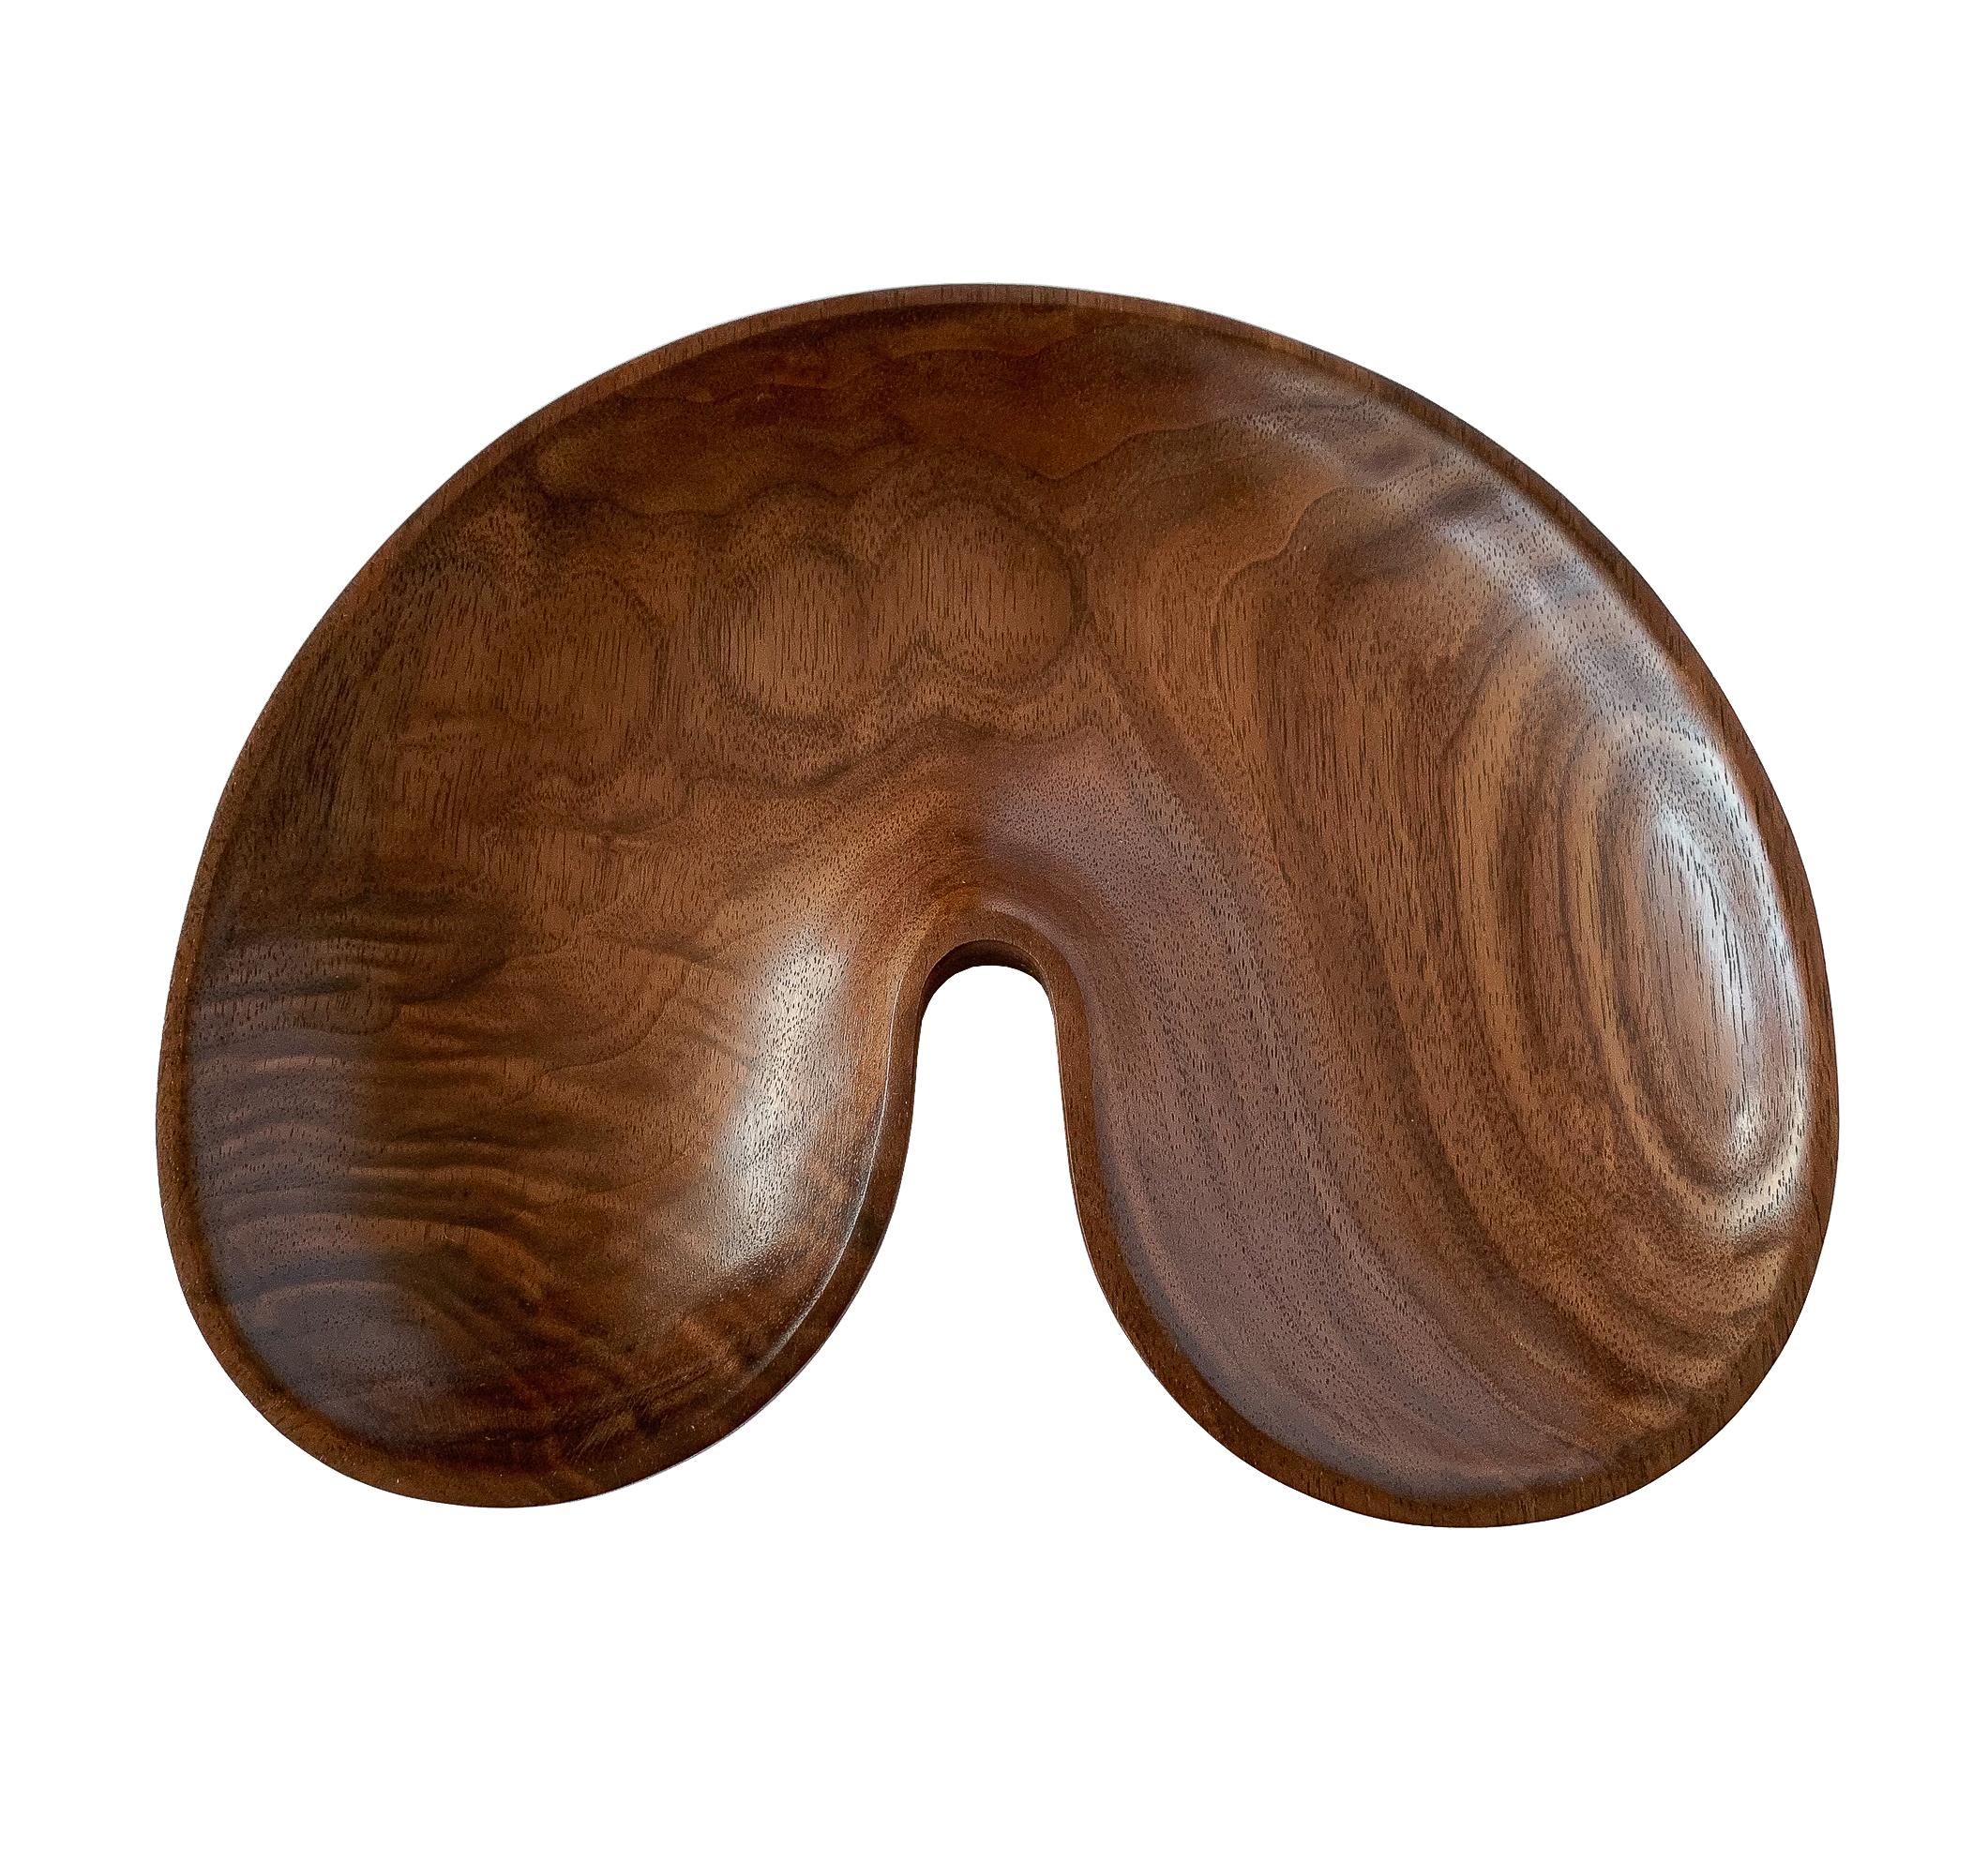 Sculptural Hand Carved Walnut Bowl by Foxwood Co.